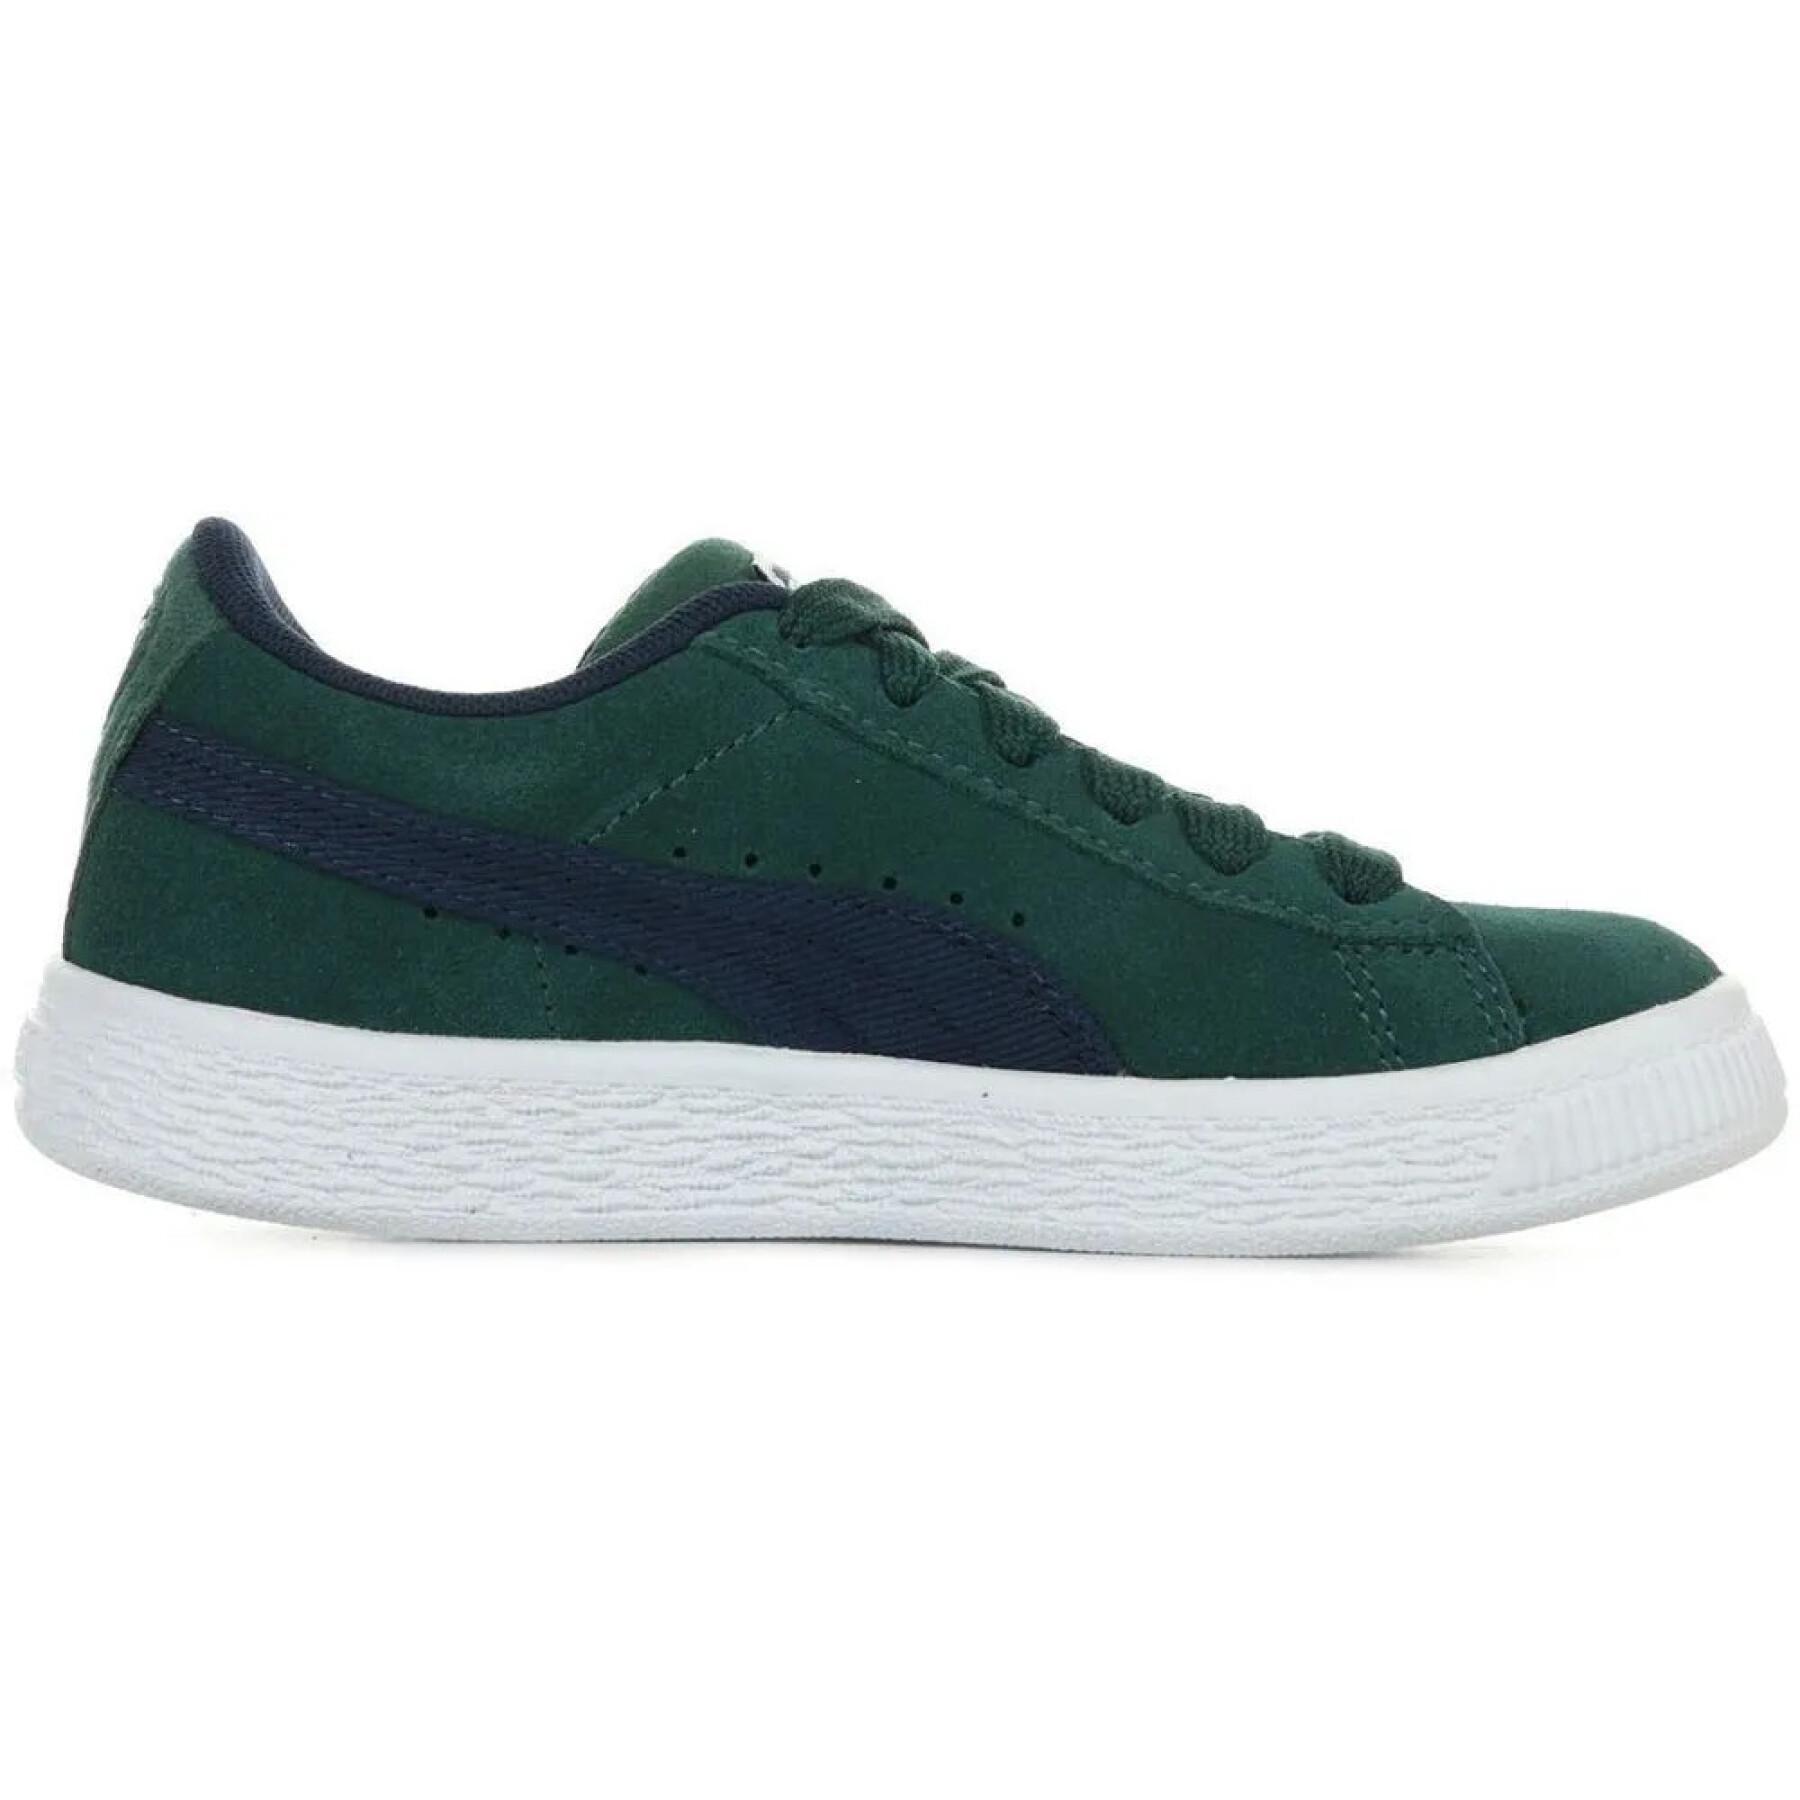 Kindertrainers Puma Suede Classic DNM PS